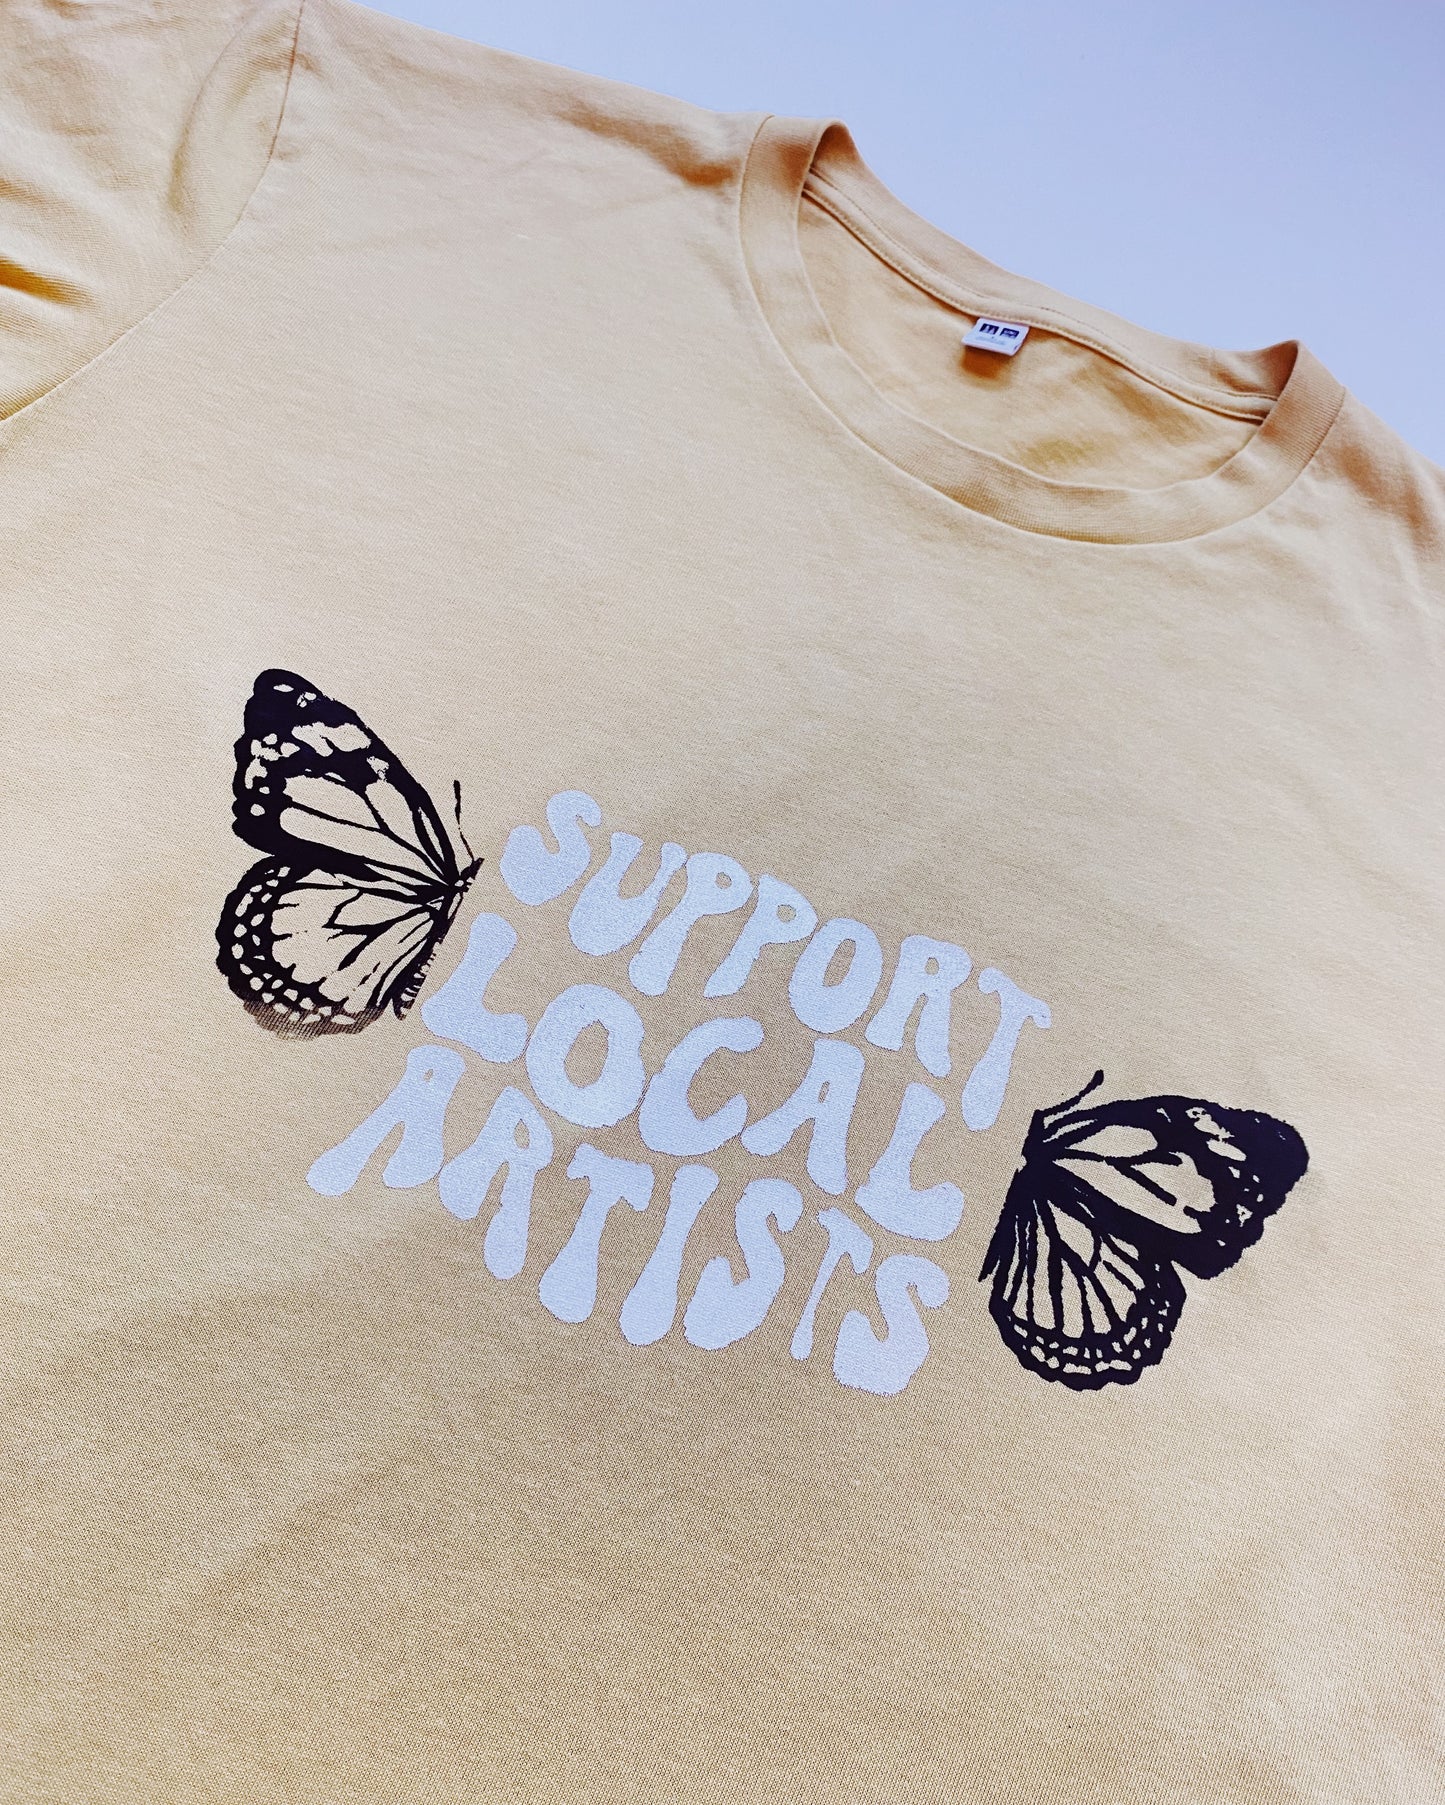 support local artists butterfly tee